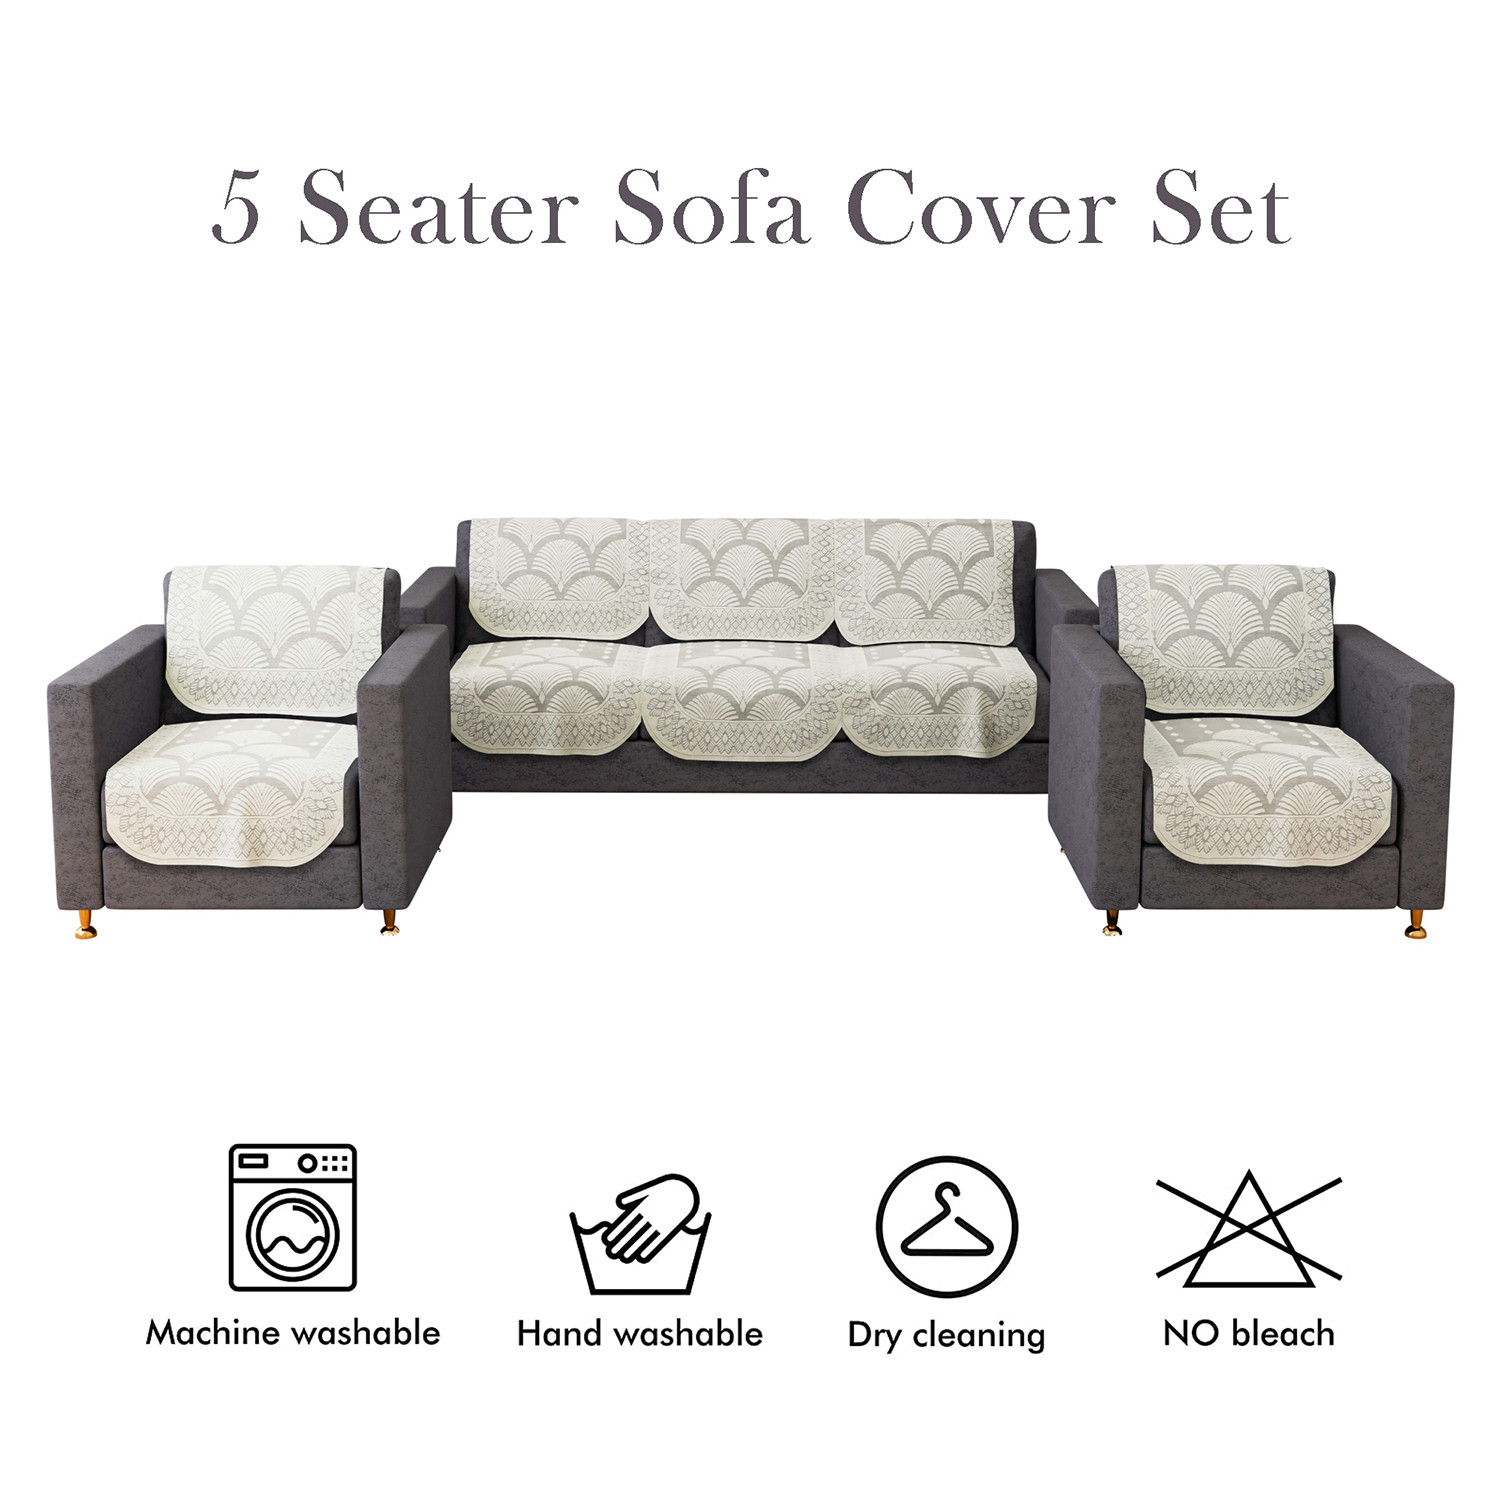 Kuber Industries Sofa Cover | Cotton Net Rainbow Sofa Cover | 5-Seater Sofa Cover for Home Decor | Sofa cover Set for Living room | Cream